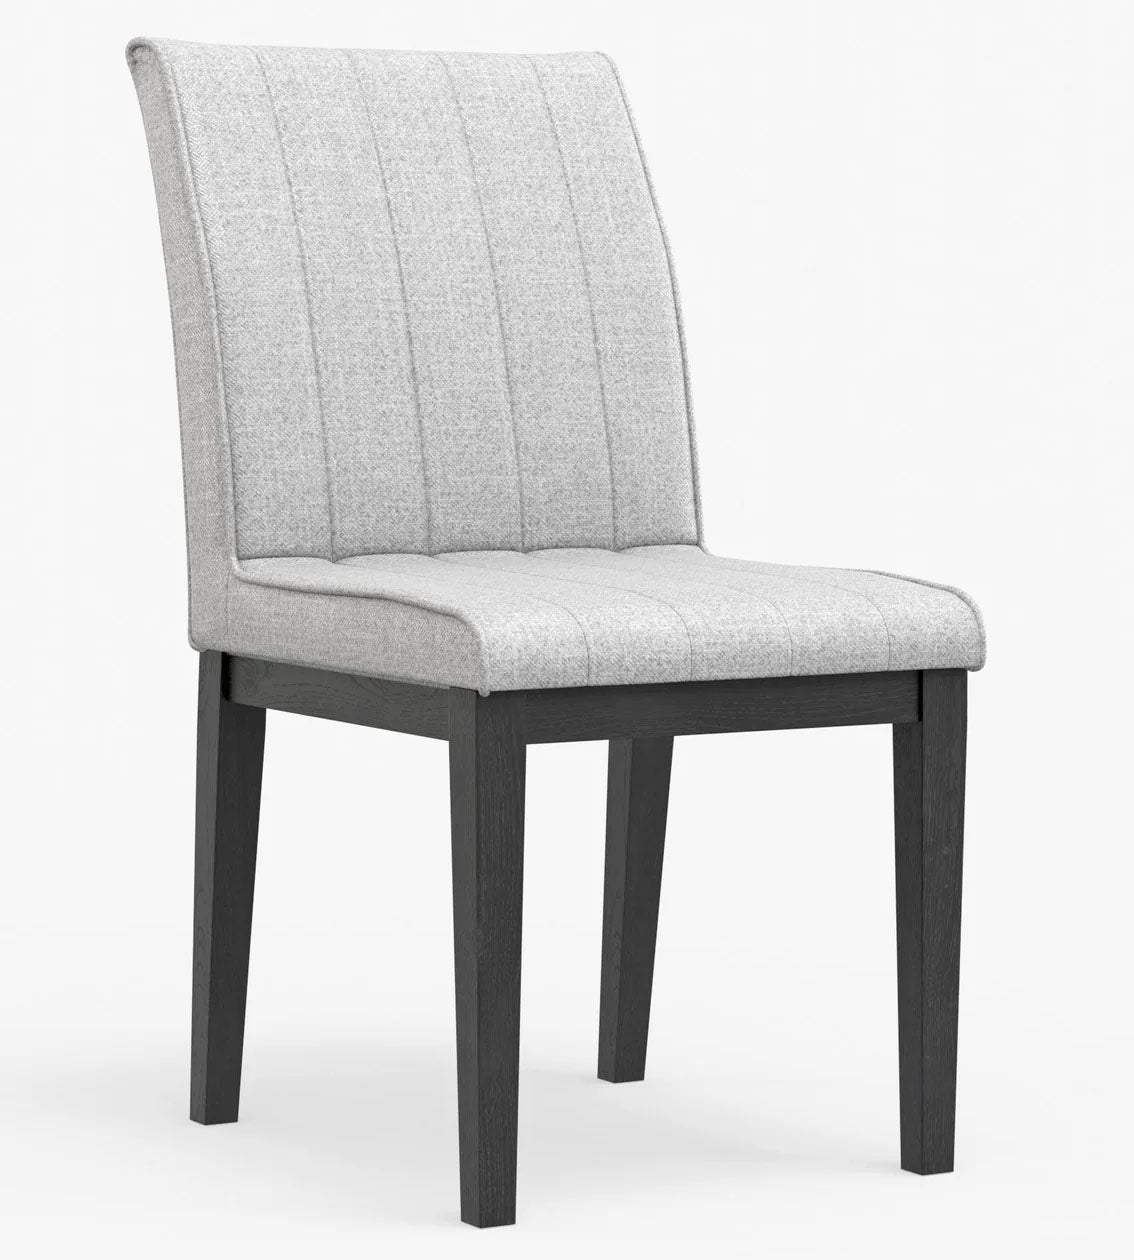 Haven Upholstered Dining Chair - MJM Furniture